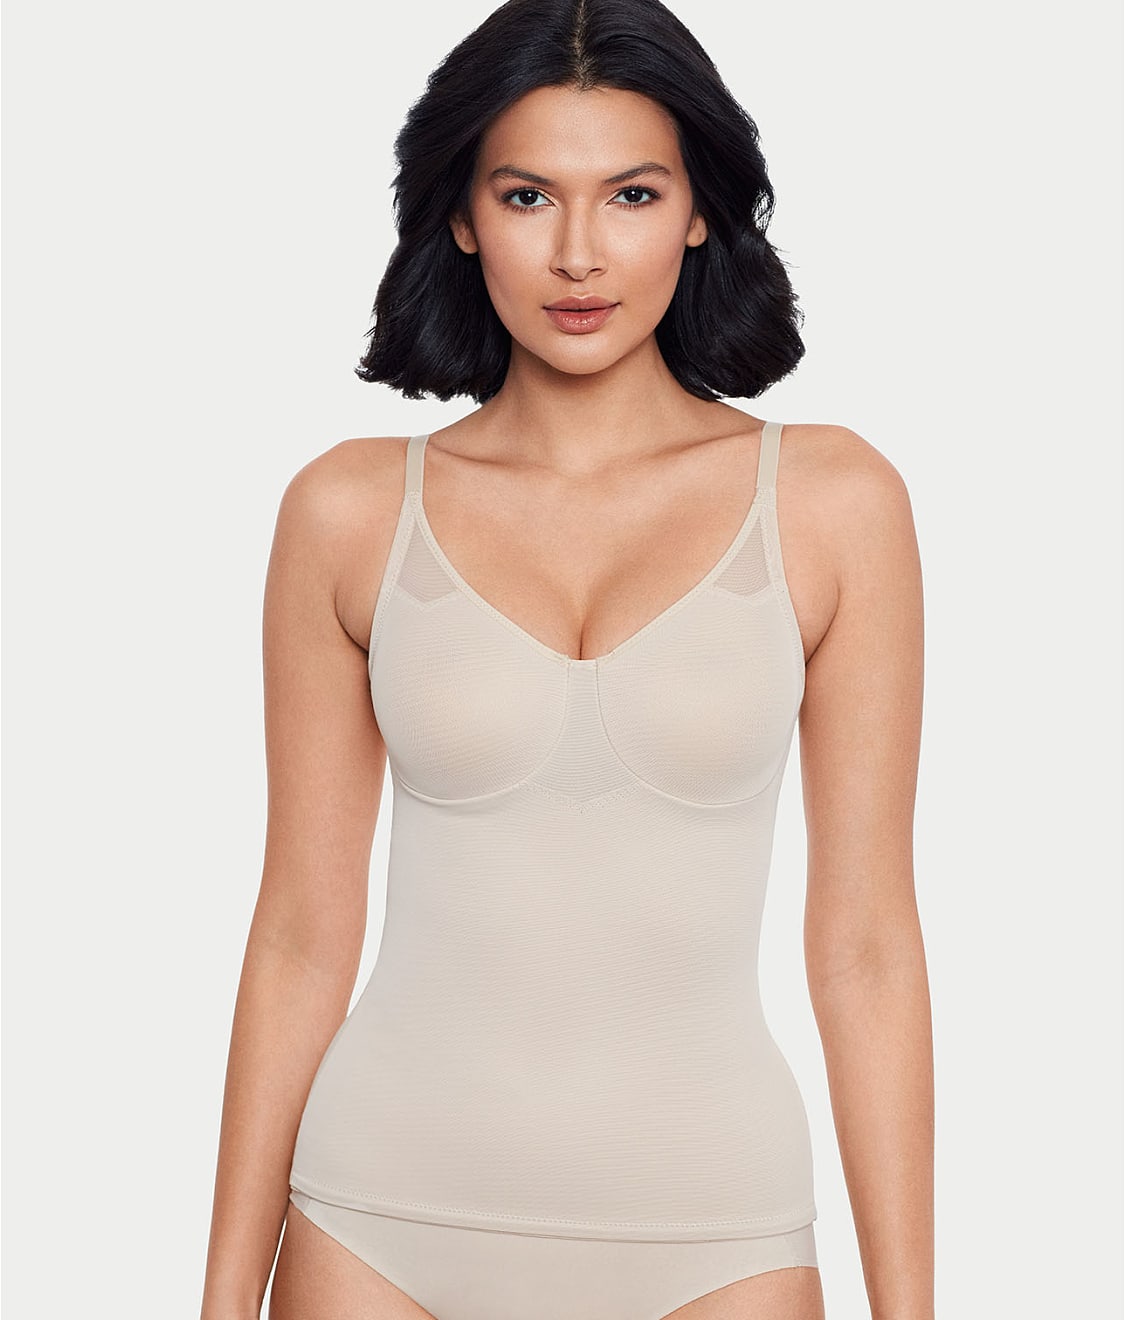 Miraclesuit Sexy Sheer Extra-Firm Control Camisole & Reviews